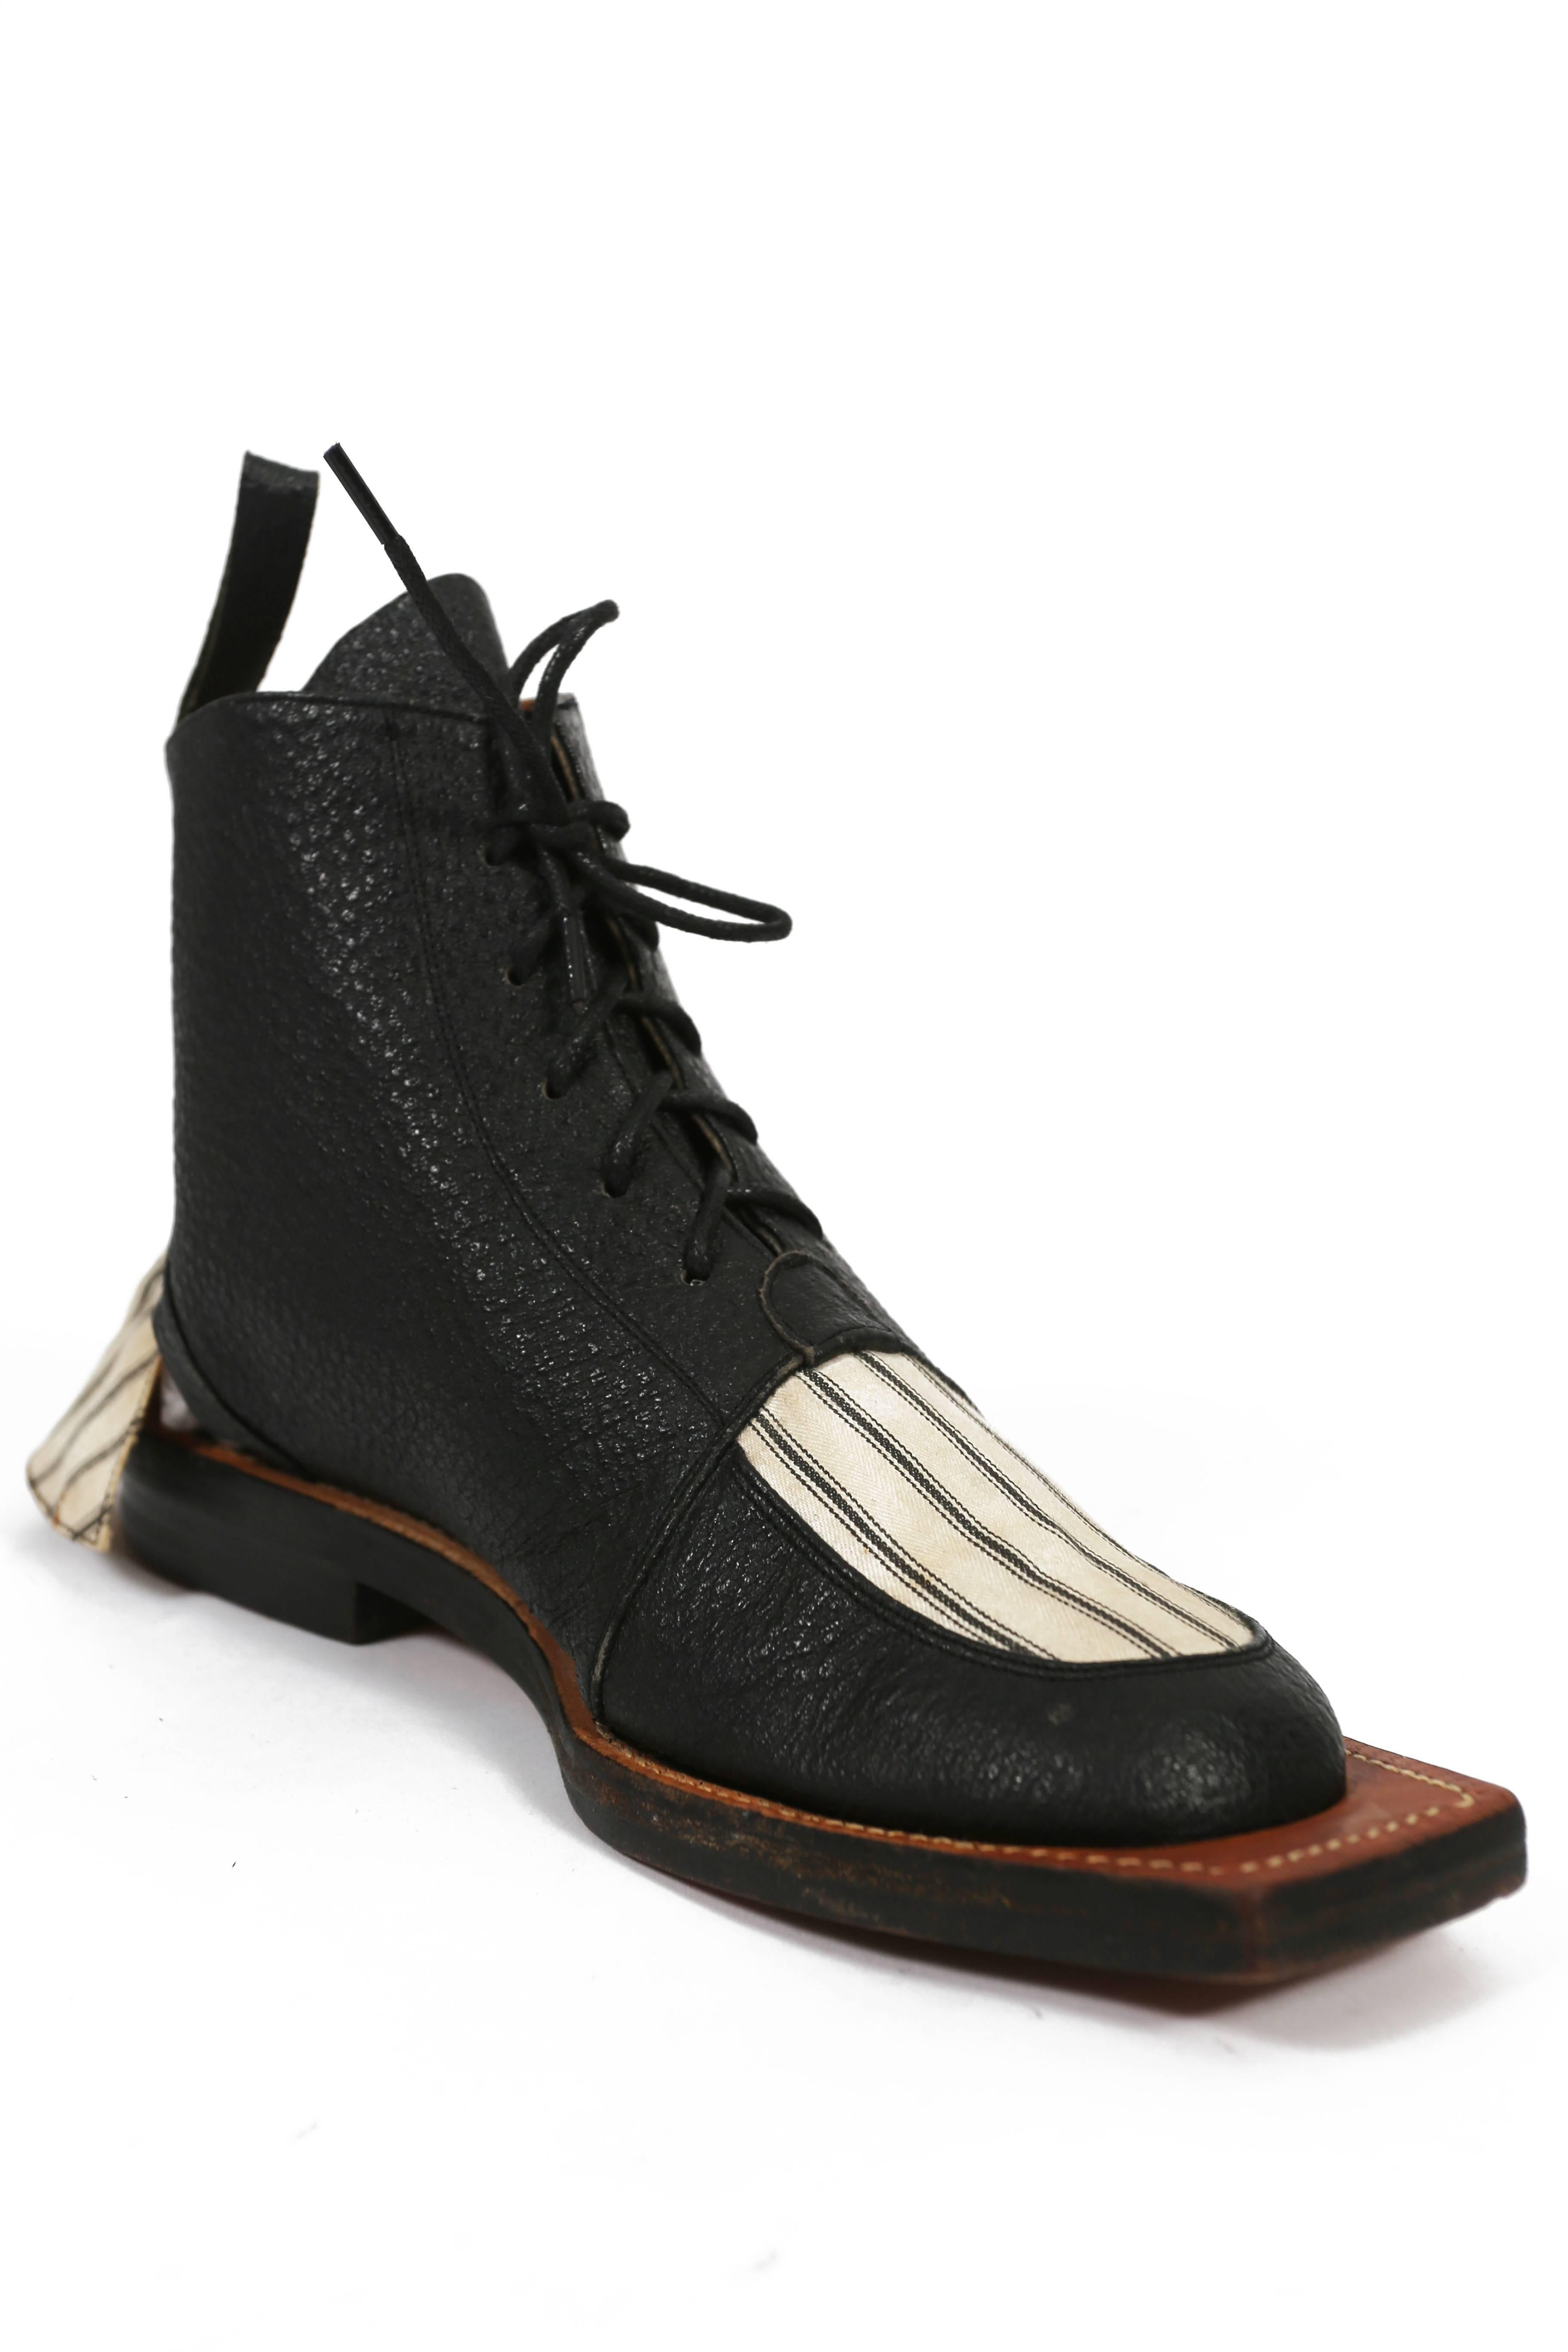 Extremely rare and early John Galliano leather hammerhead boots from the 'Fallen Angels' collection, spring-summer 1986. Square toe, open ankle with striped canvas flap, lace up fastening, leather soles, and wooden heel. Galliano collaborated with